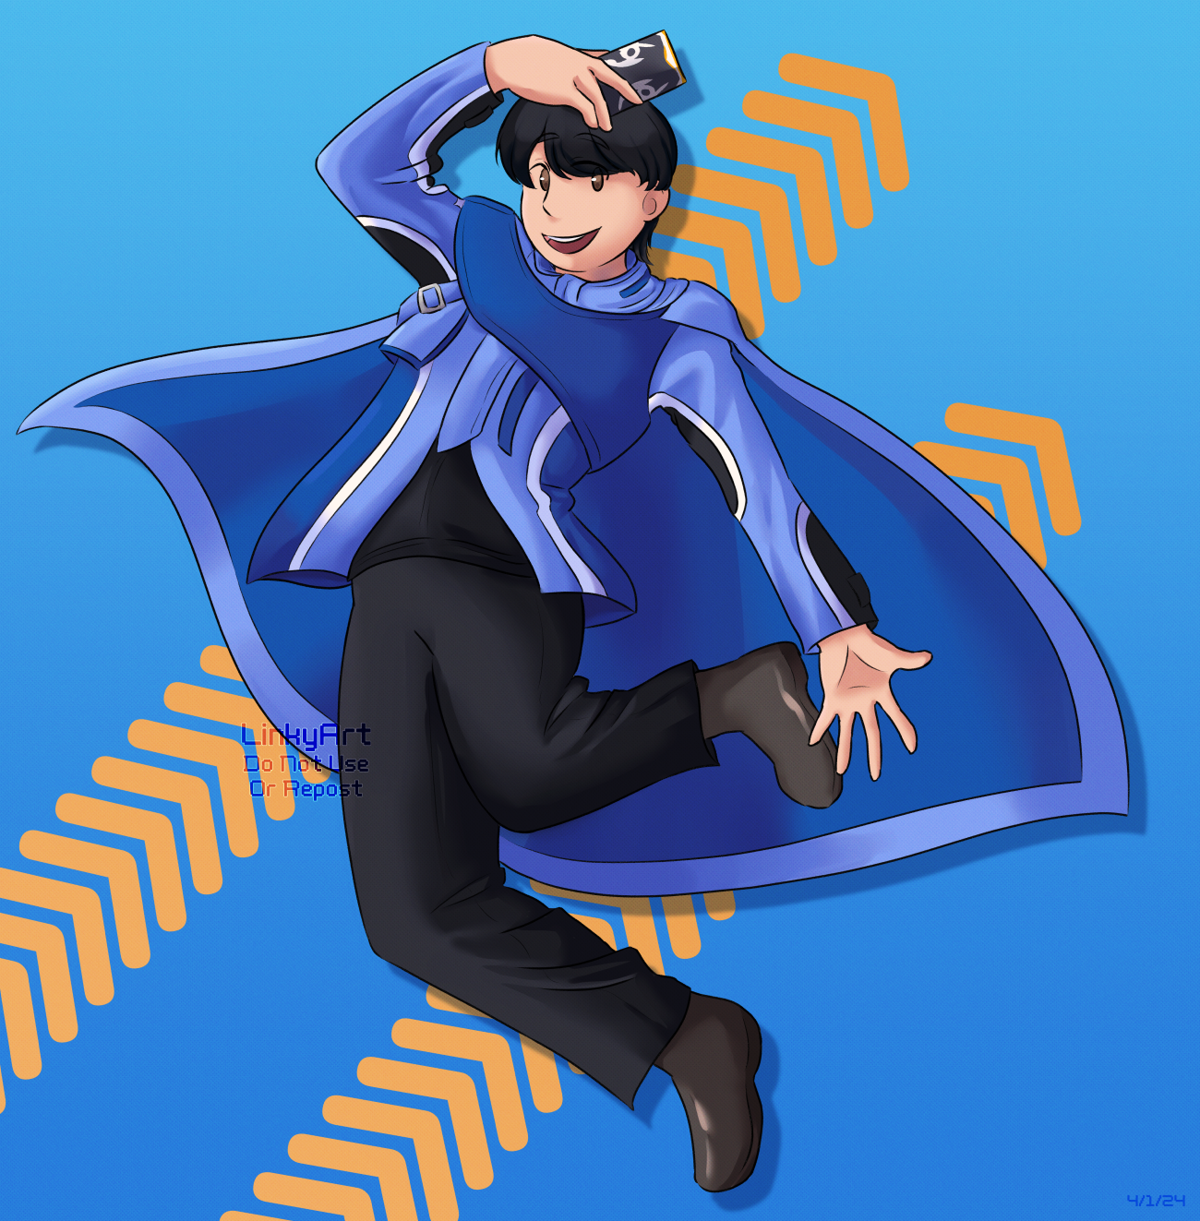 Hotaro jumping into the air with a smile on his face as he wears his alchemist academy uniform, he holds a chemy card in one hand. There is a blue background with light orange arrows behind him.